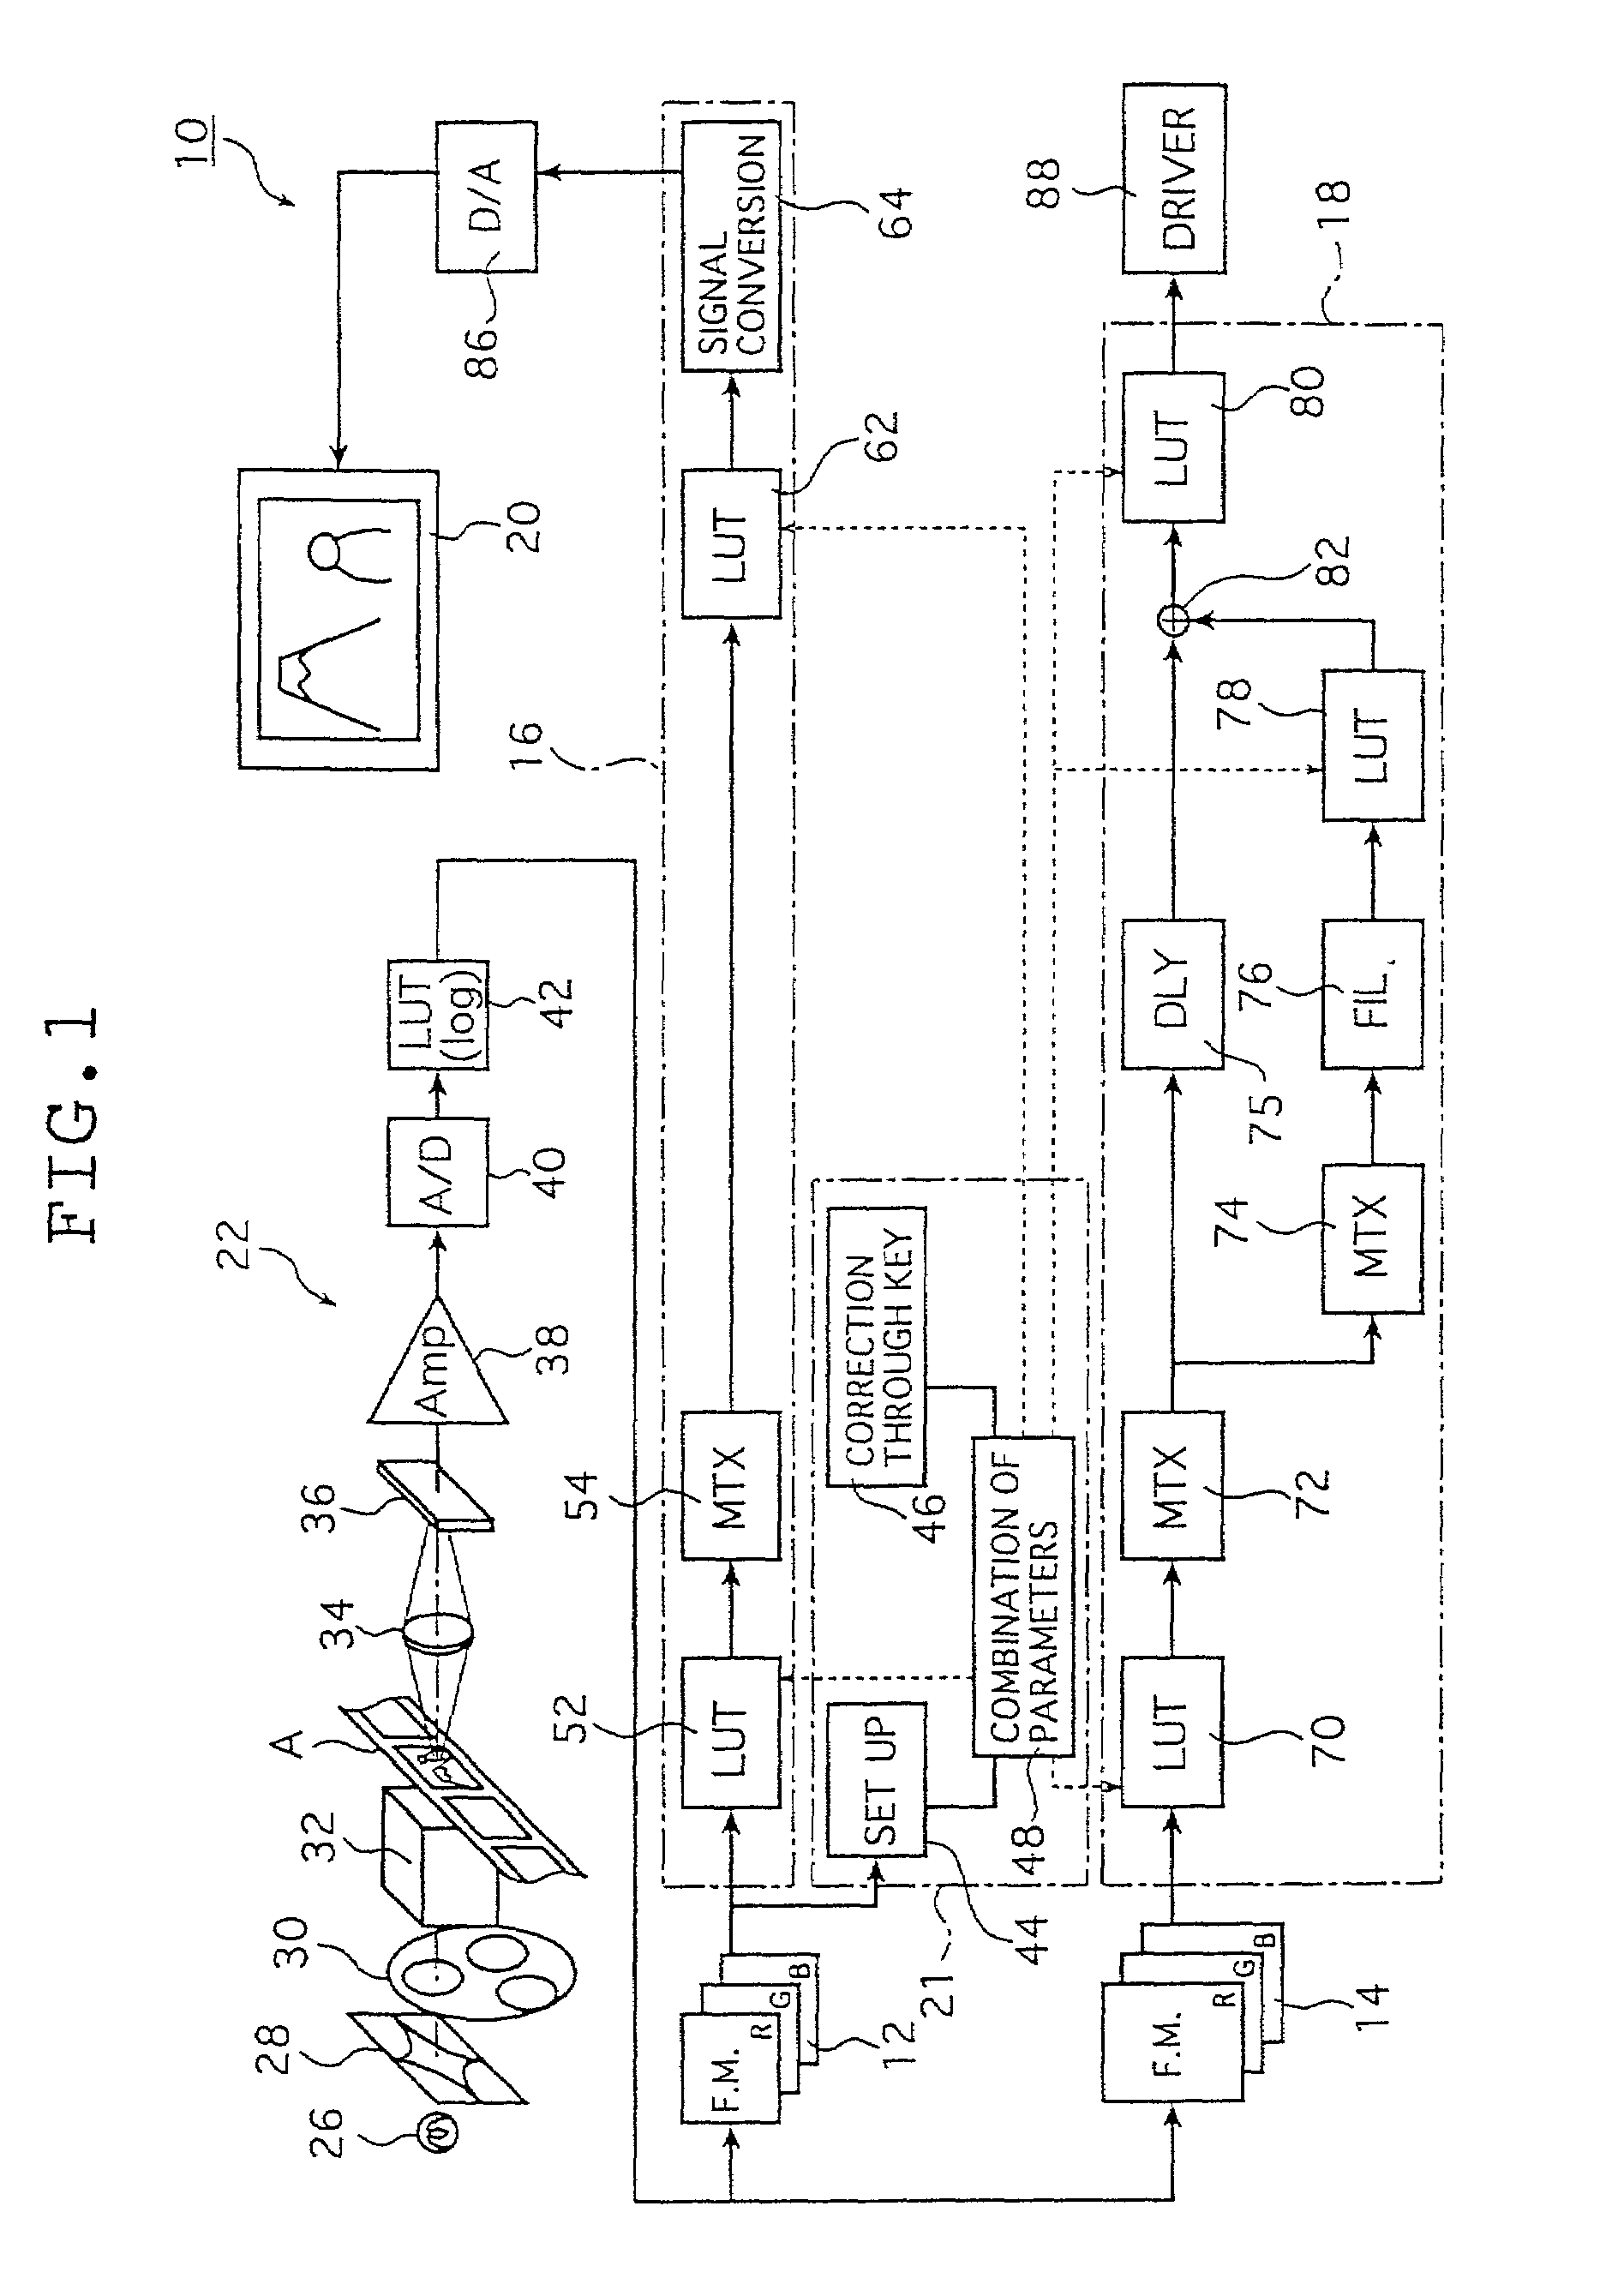 Image processing device for carrying out dodging treatment